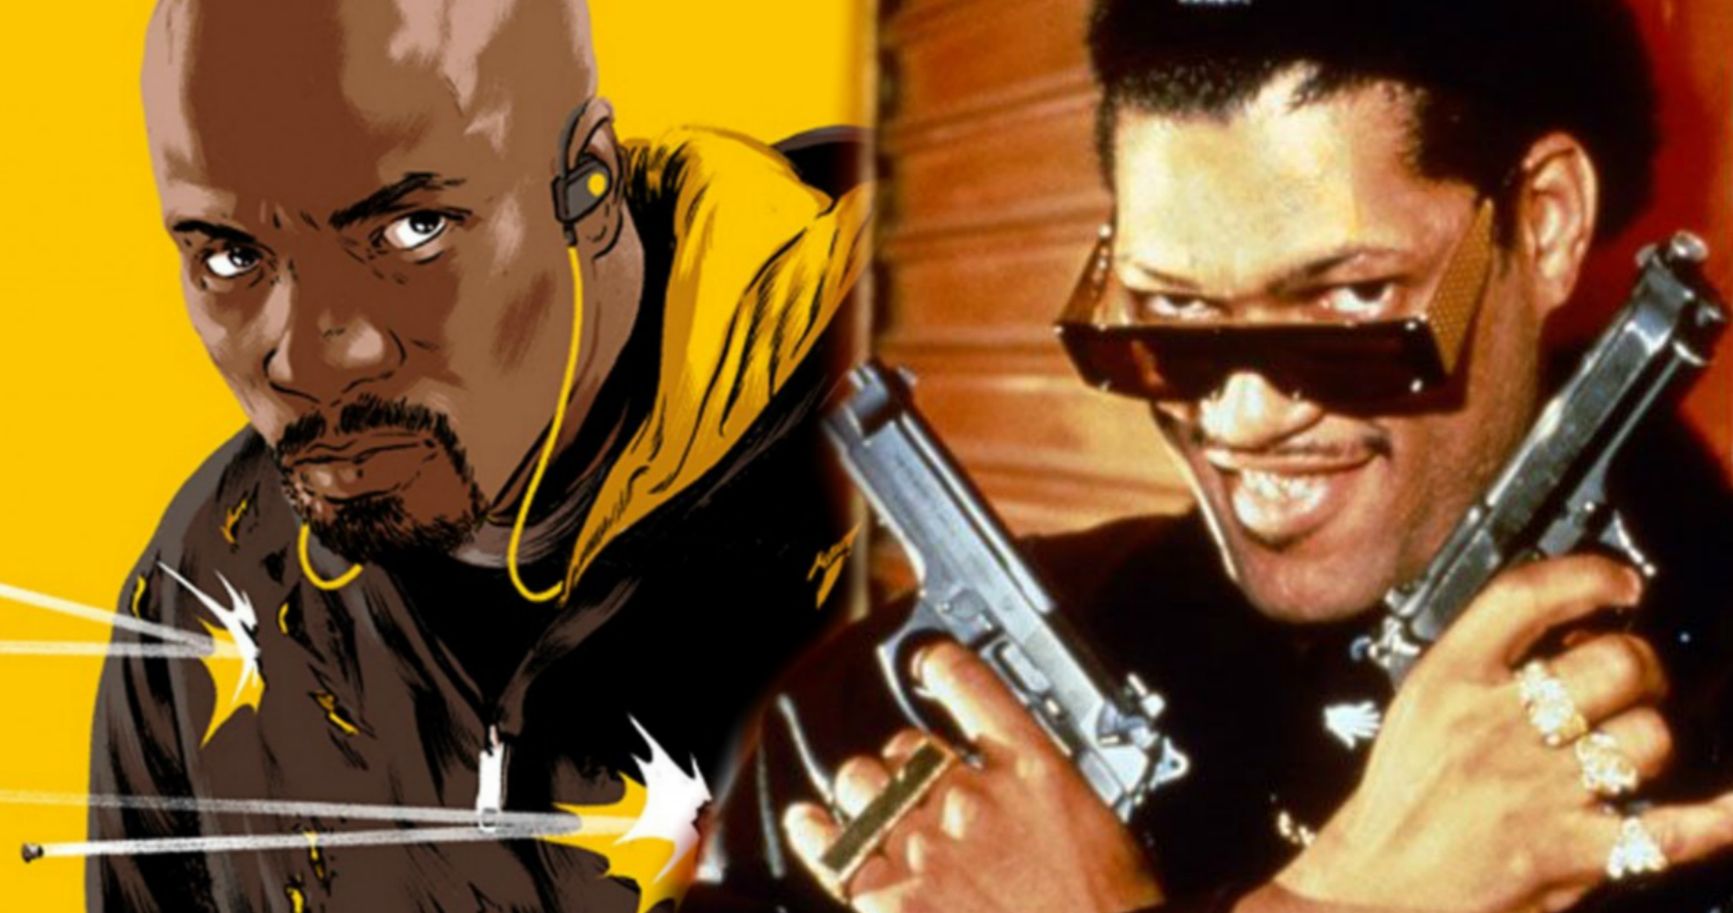 The Real Reason Quentin Tarantino Bailed on Making Marvel's Luke Cage Movie